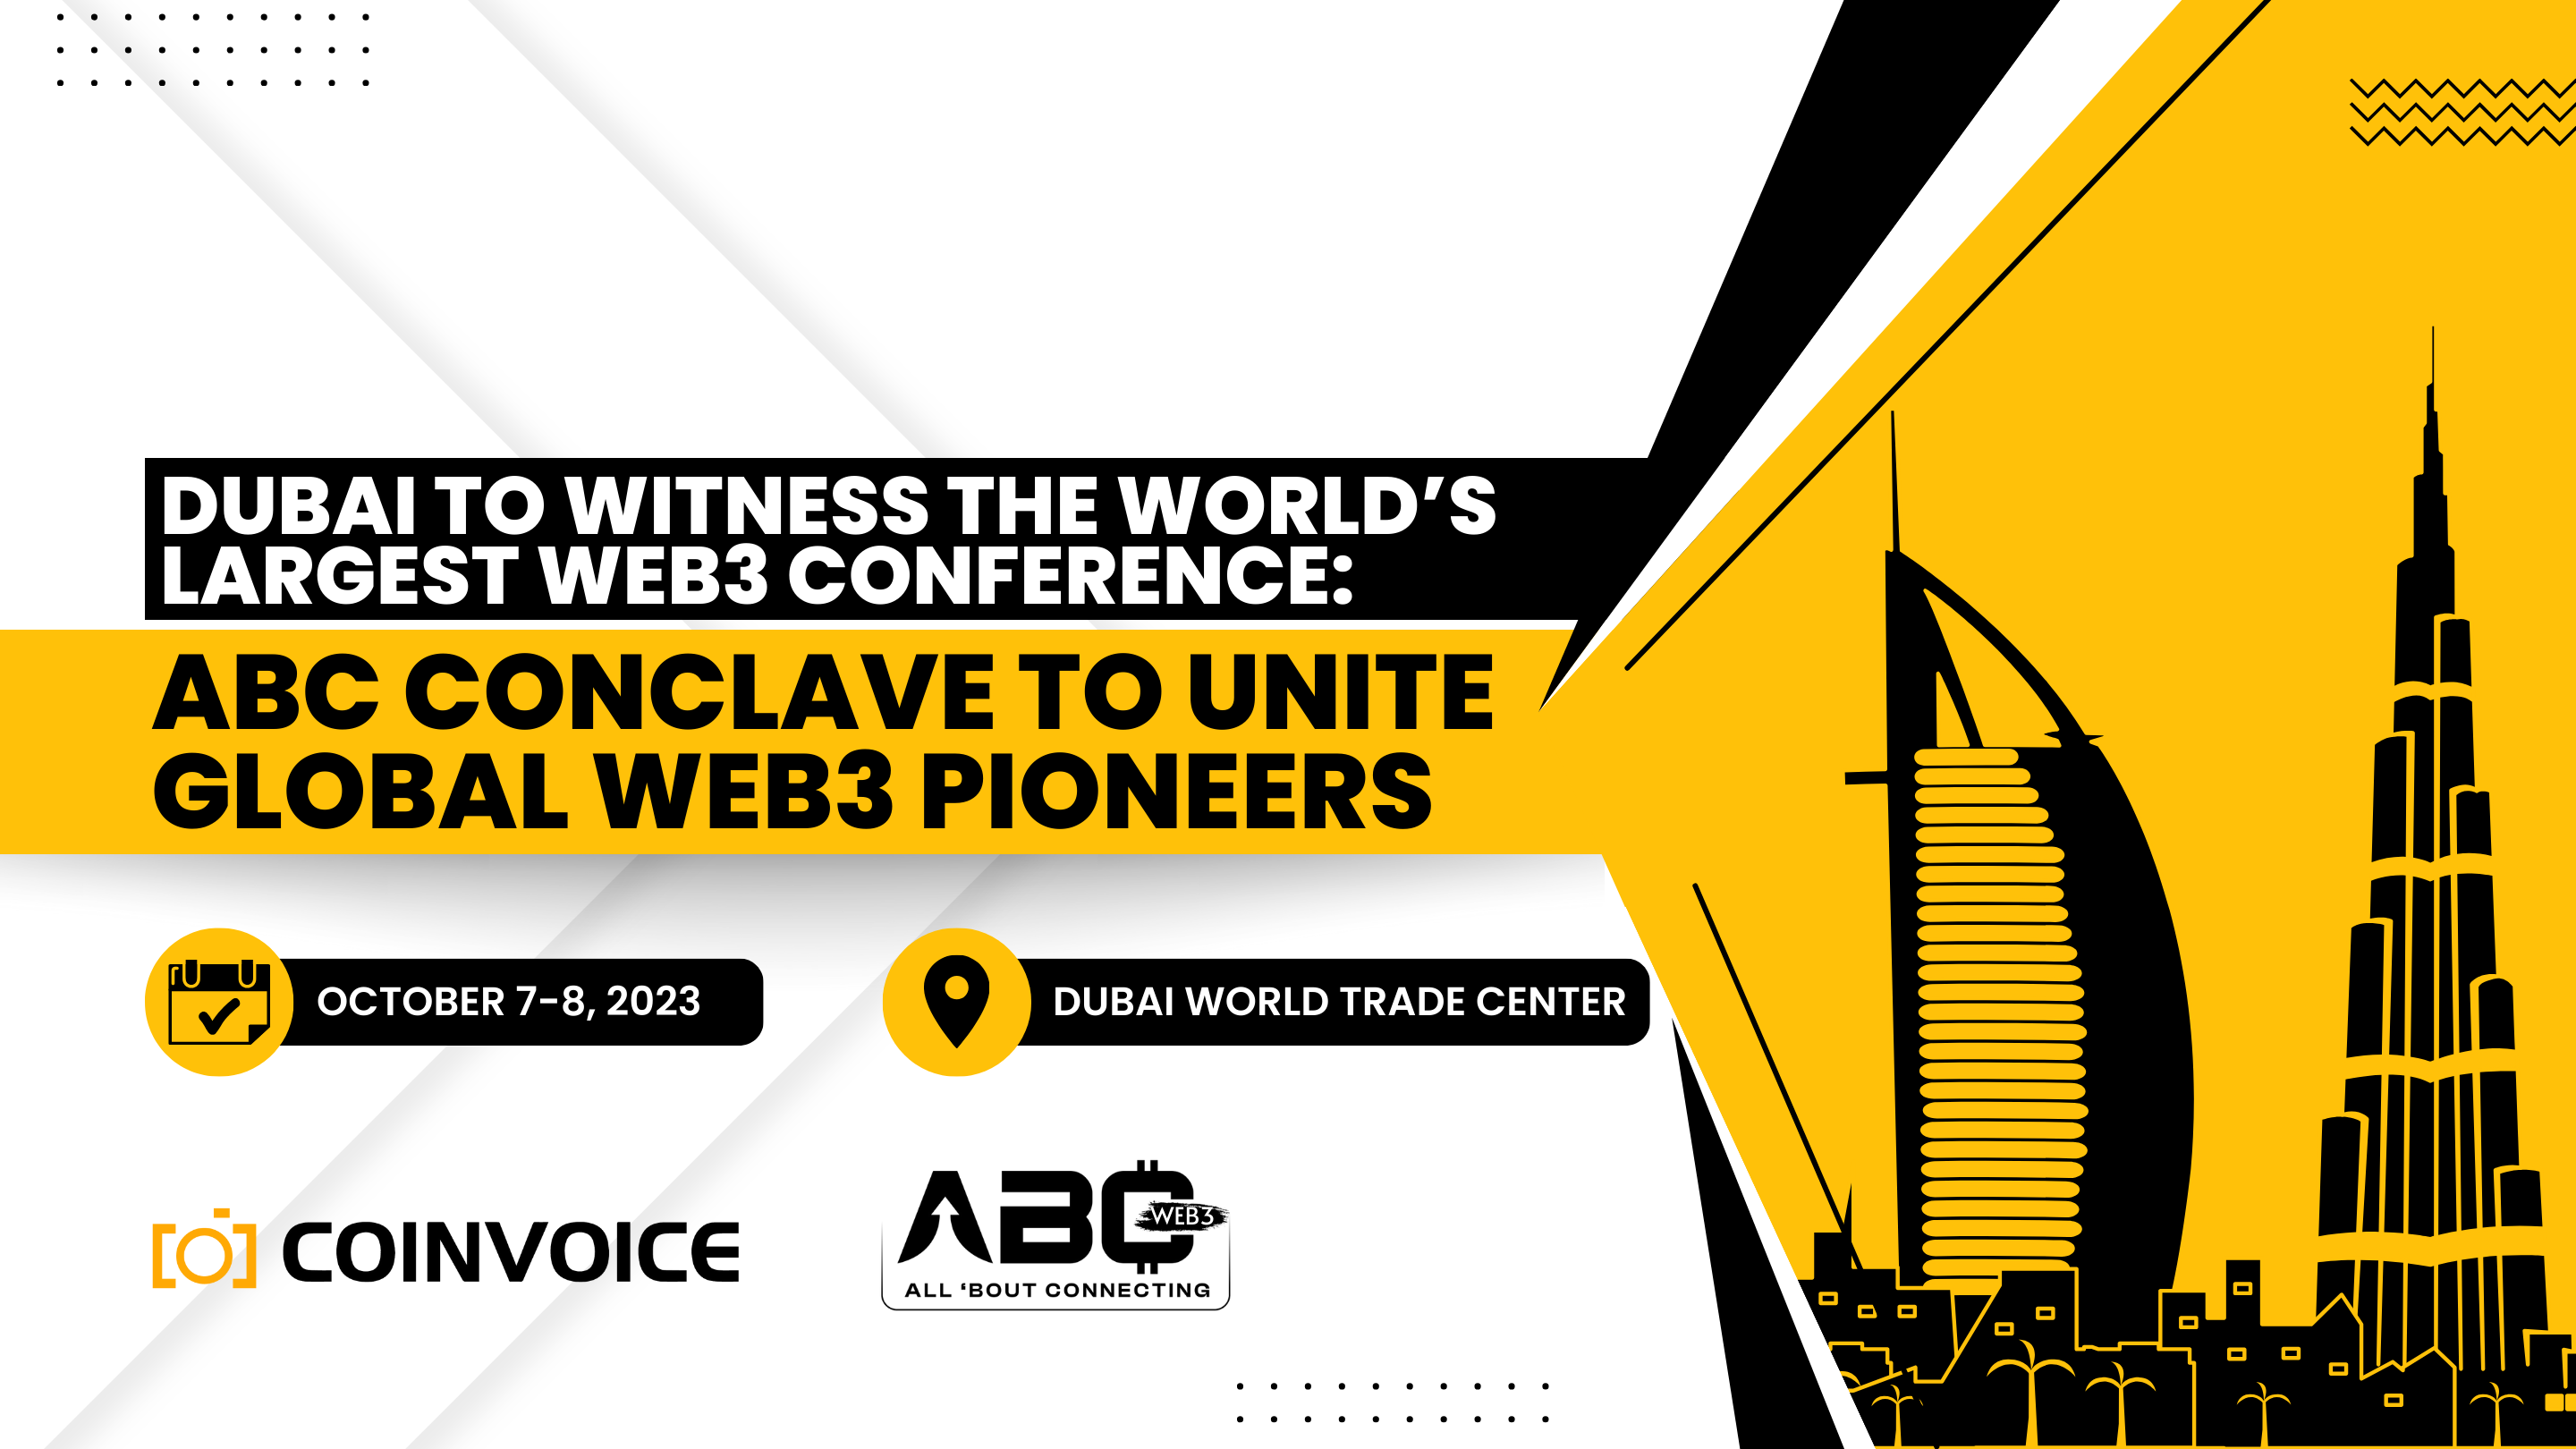 Dubai to Witness the World’s Largest Web3 Conference: ABC Conclave to Unite Global Web3 Pioneers